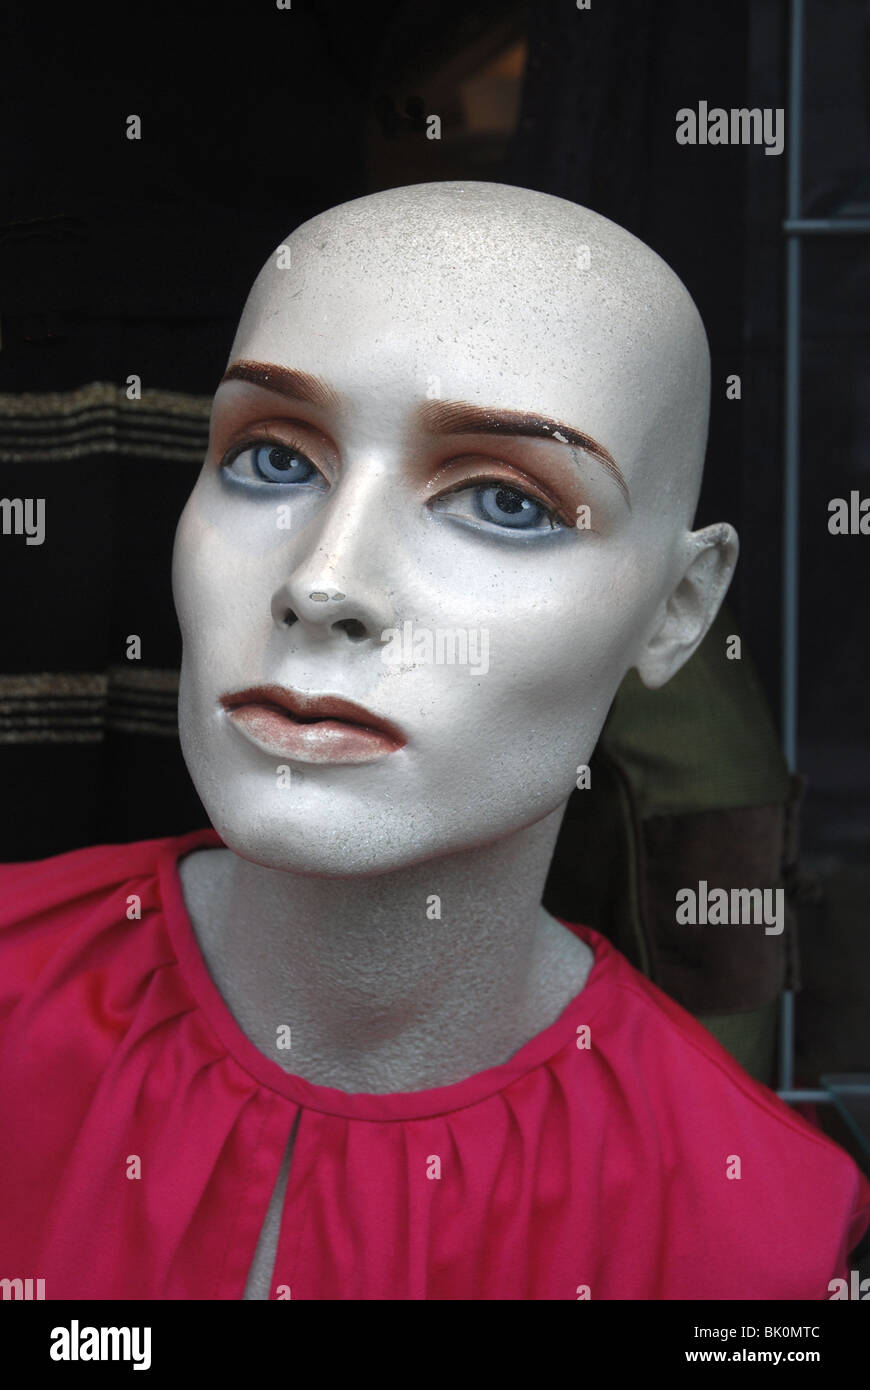 Bald headed mannequin in a charity shop window. Stock Photo